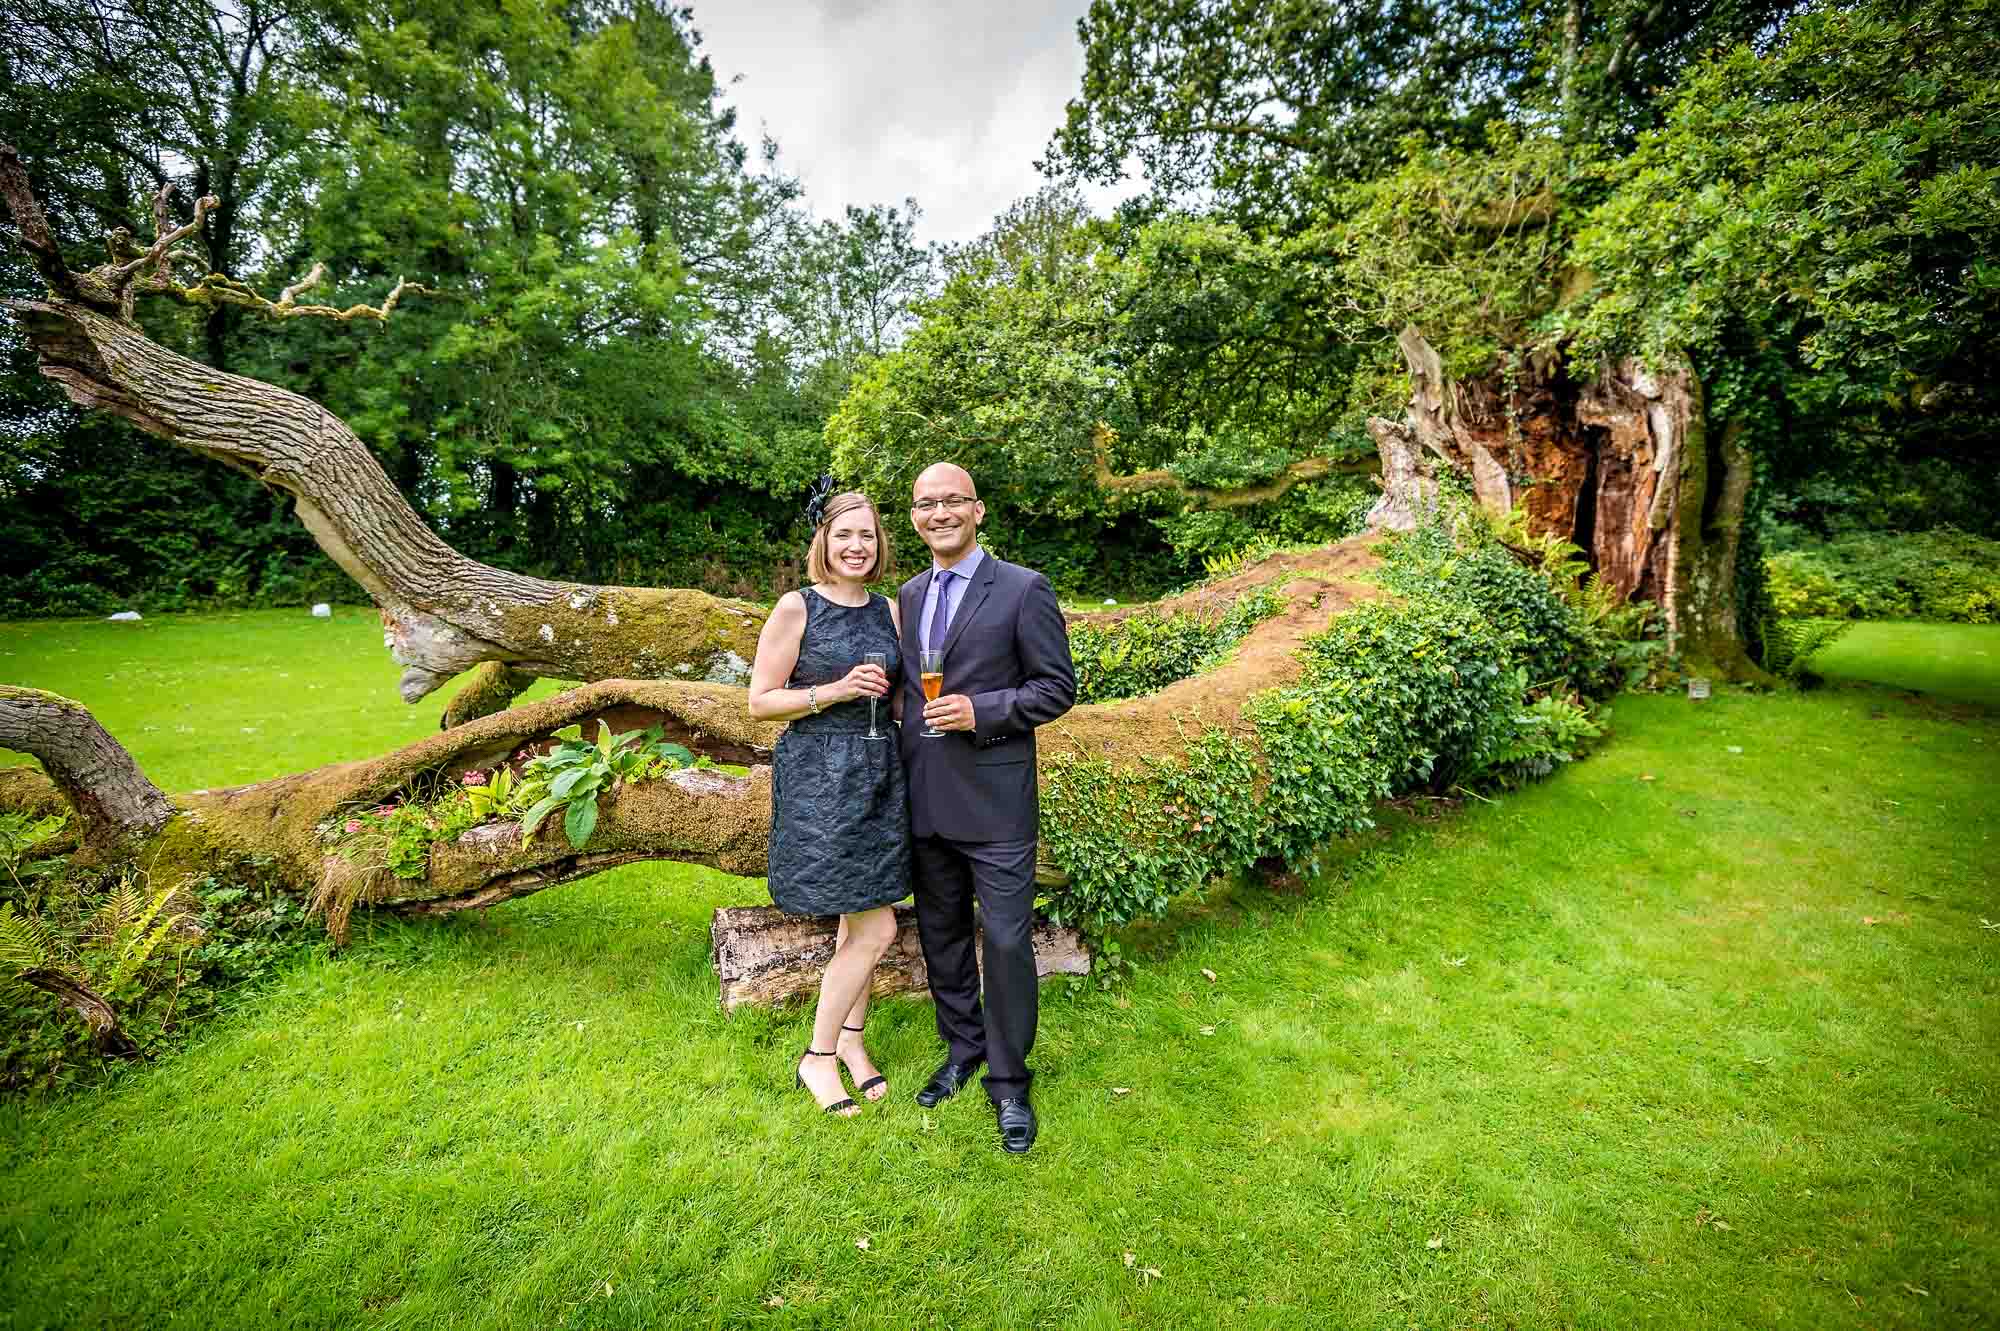 Happy guests pose in front of fallen tree at Plas Glansevin in Wales